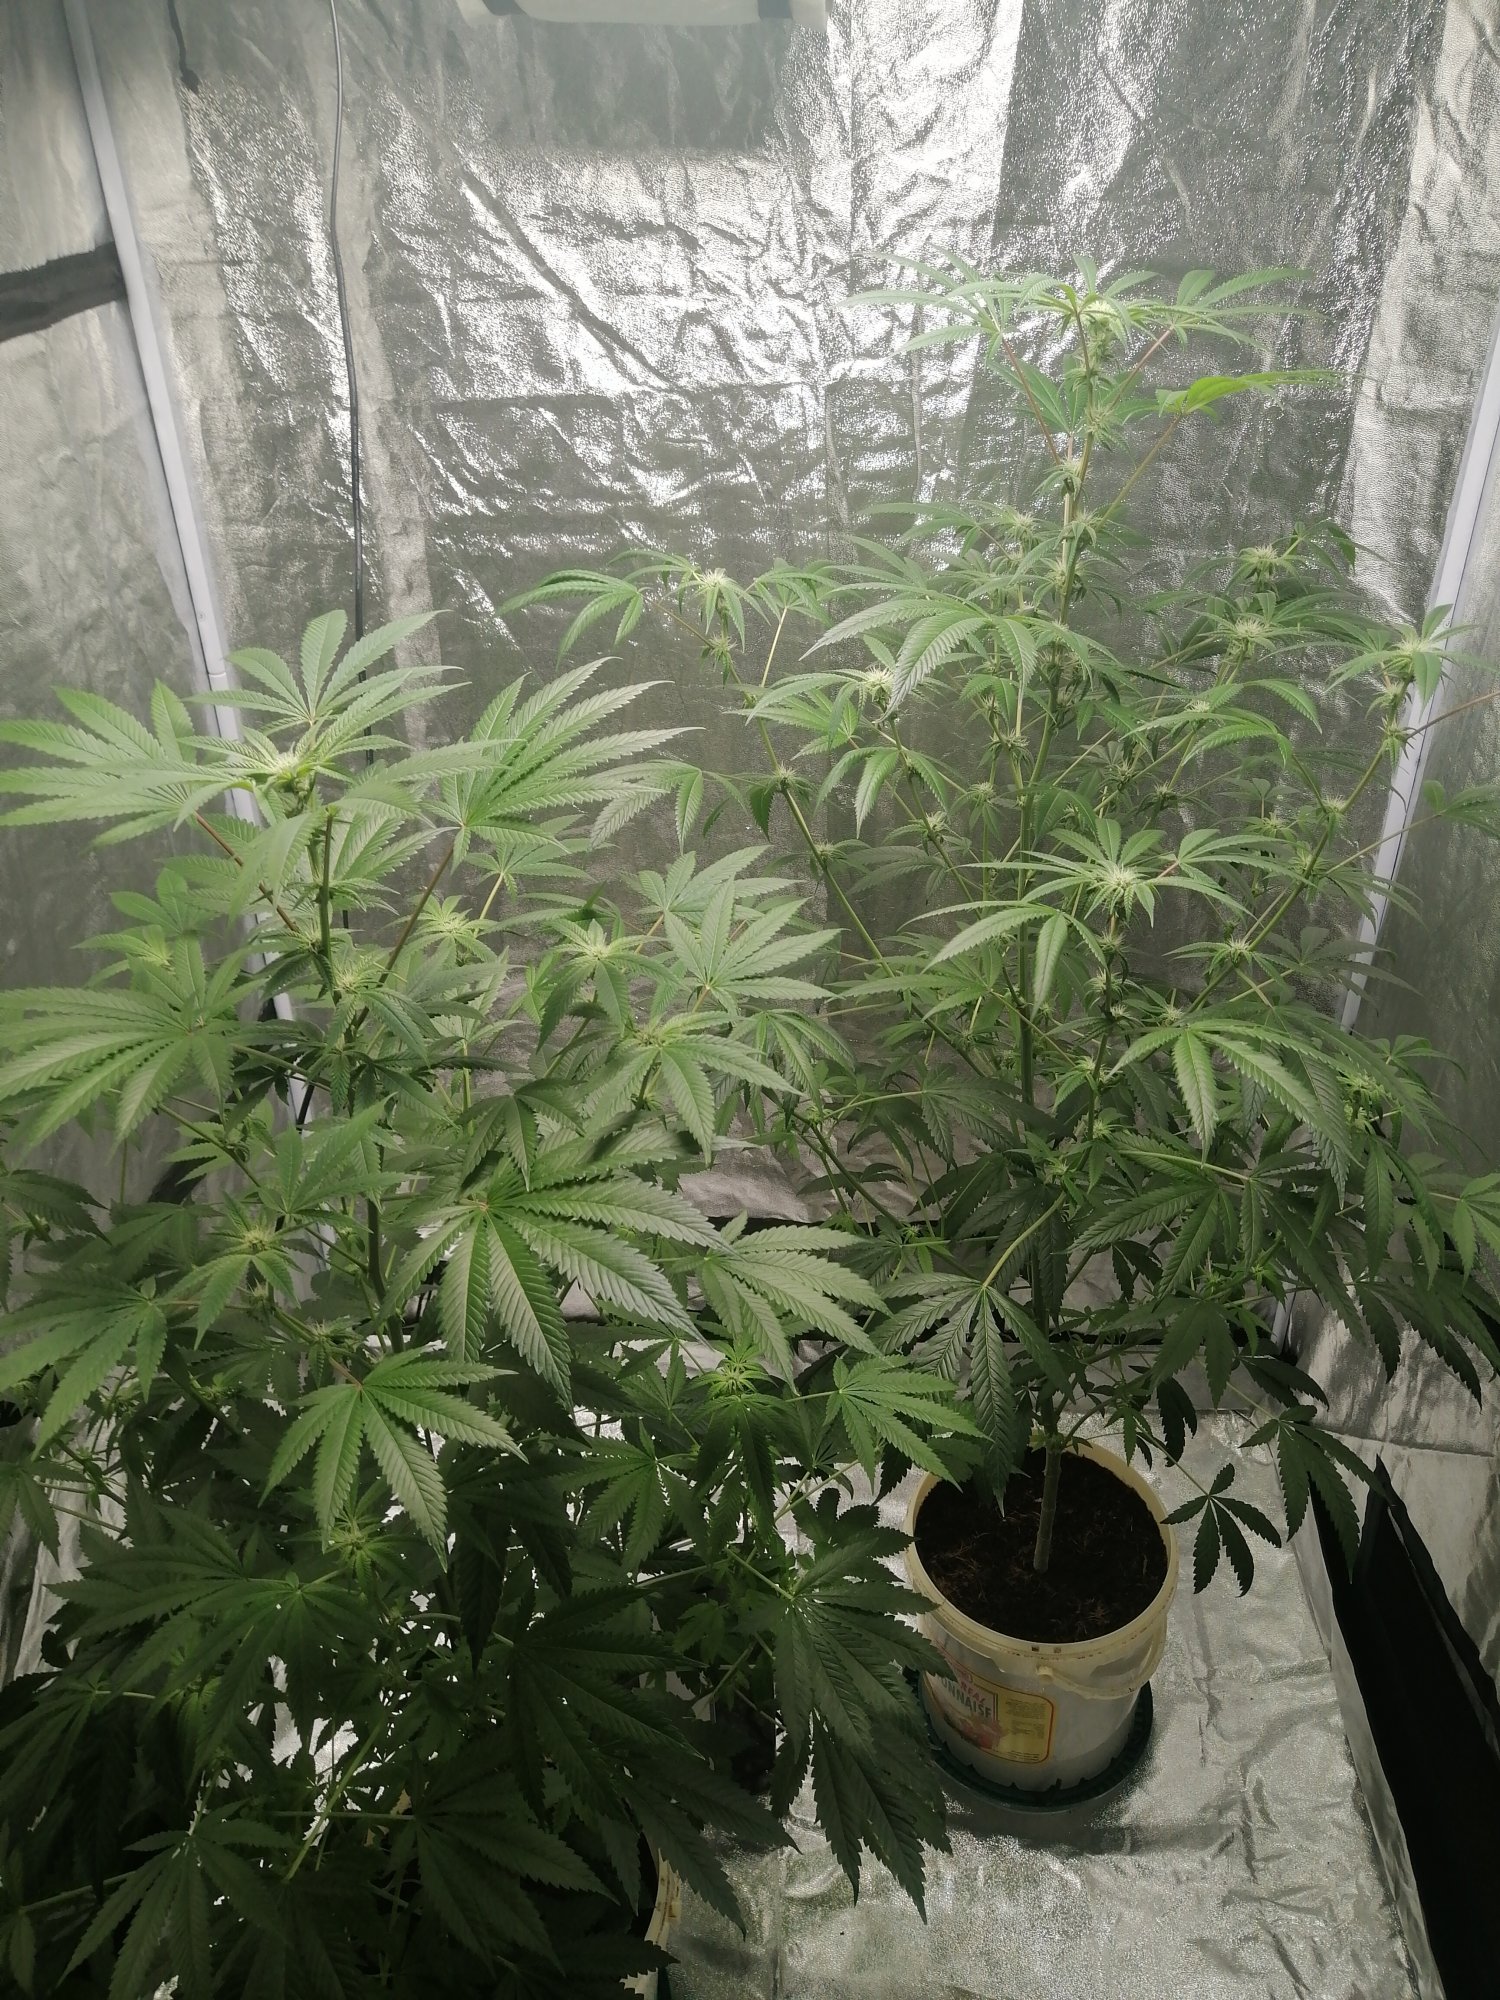 This is my first grow